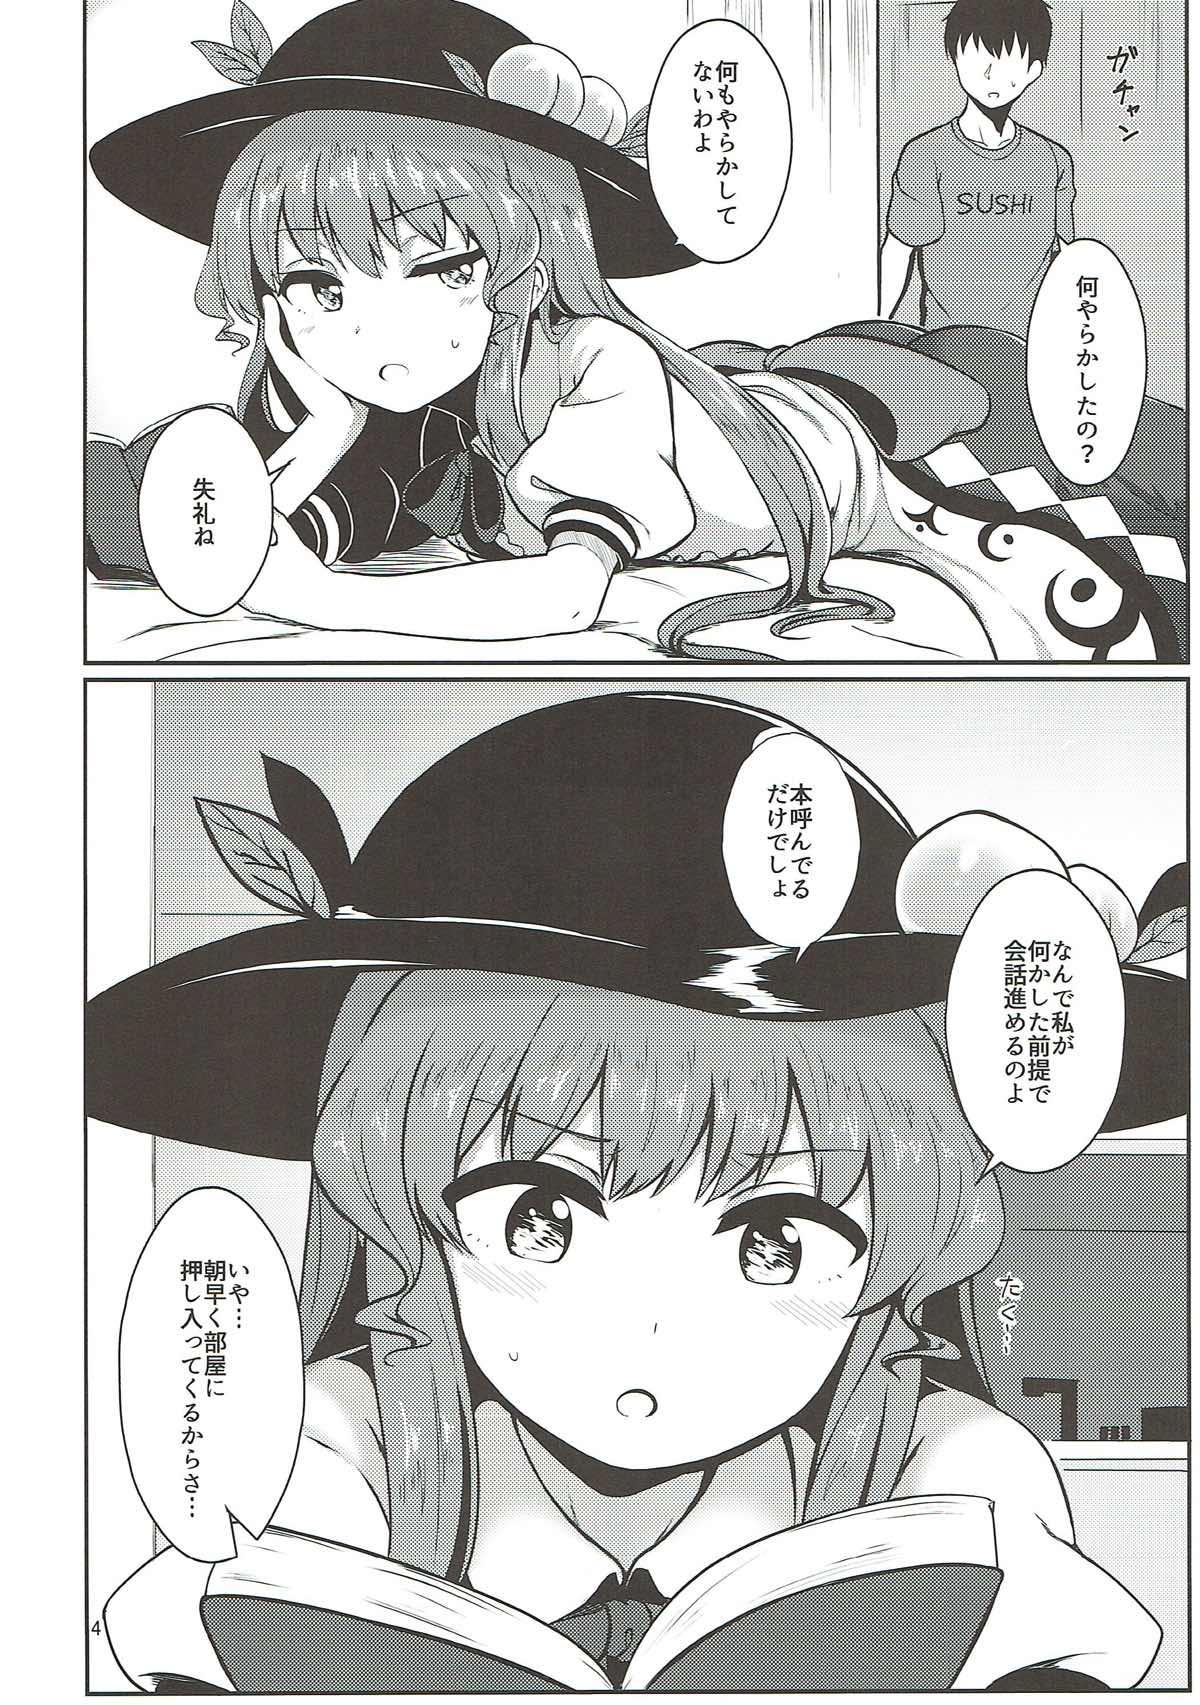 Trimmed Souryou Musume no Ayashikata 2 - Touhou project African - Page 3